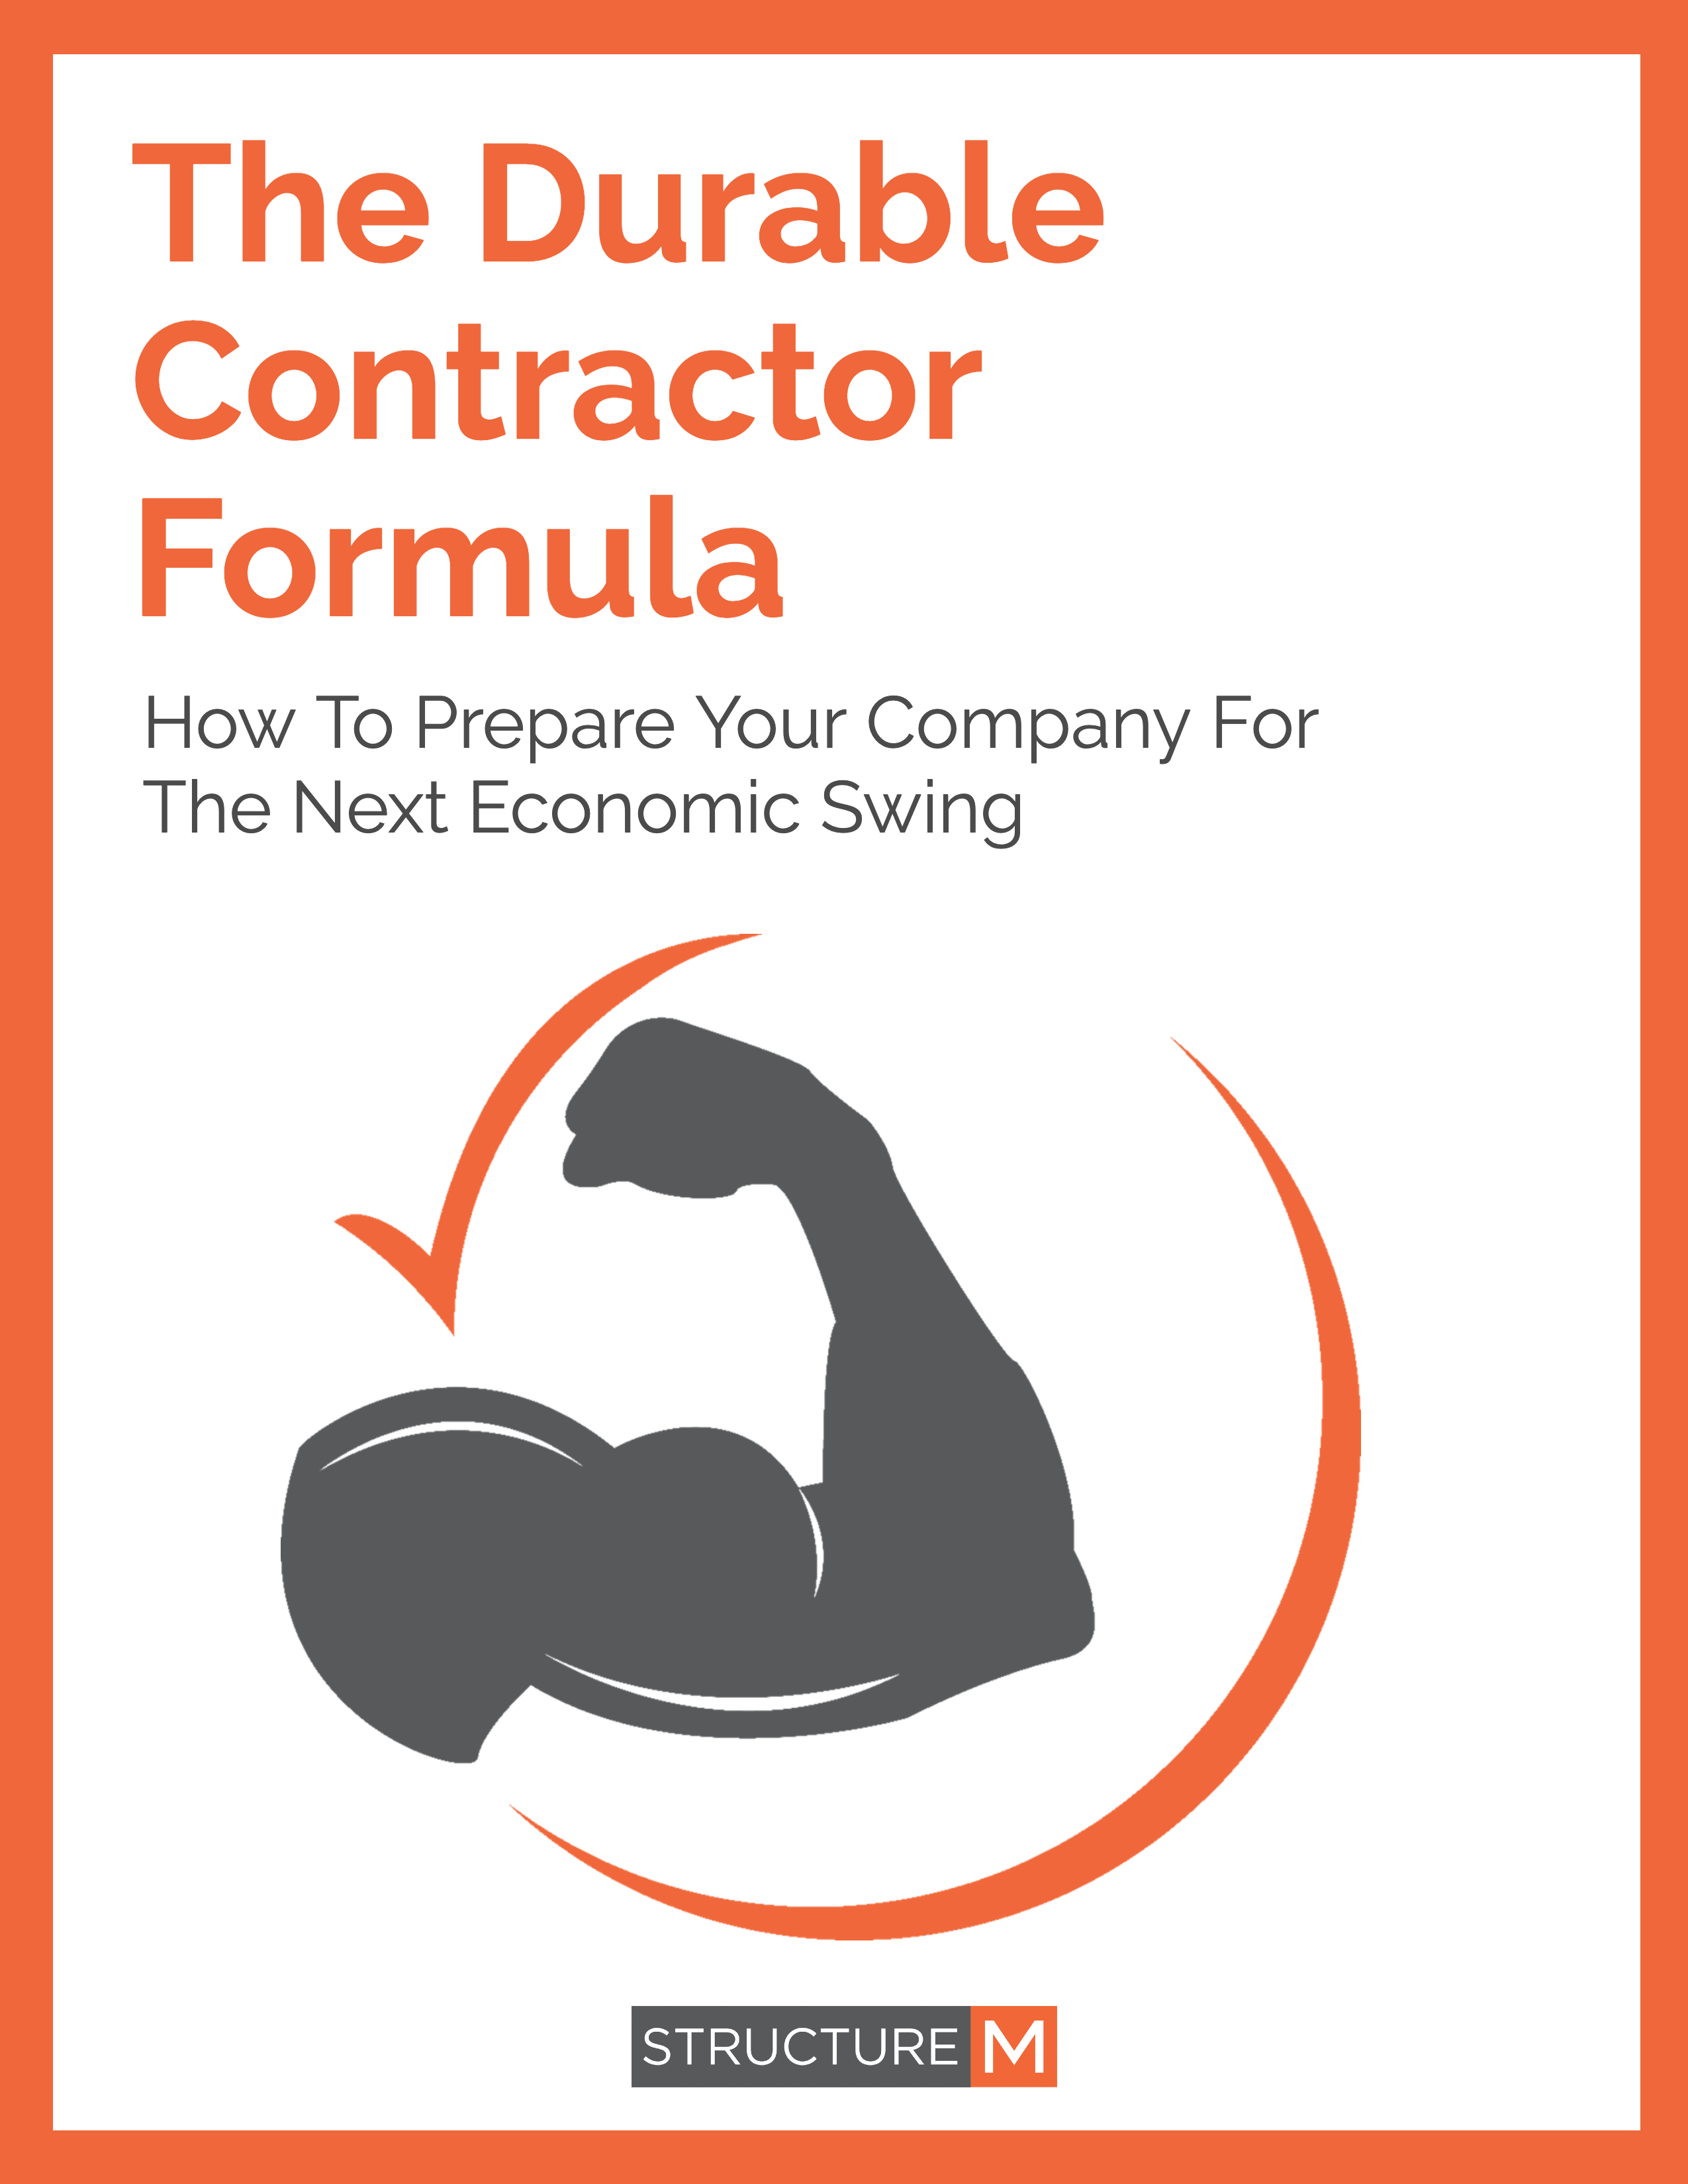 The Durable Contractor Formula